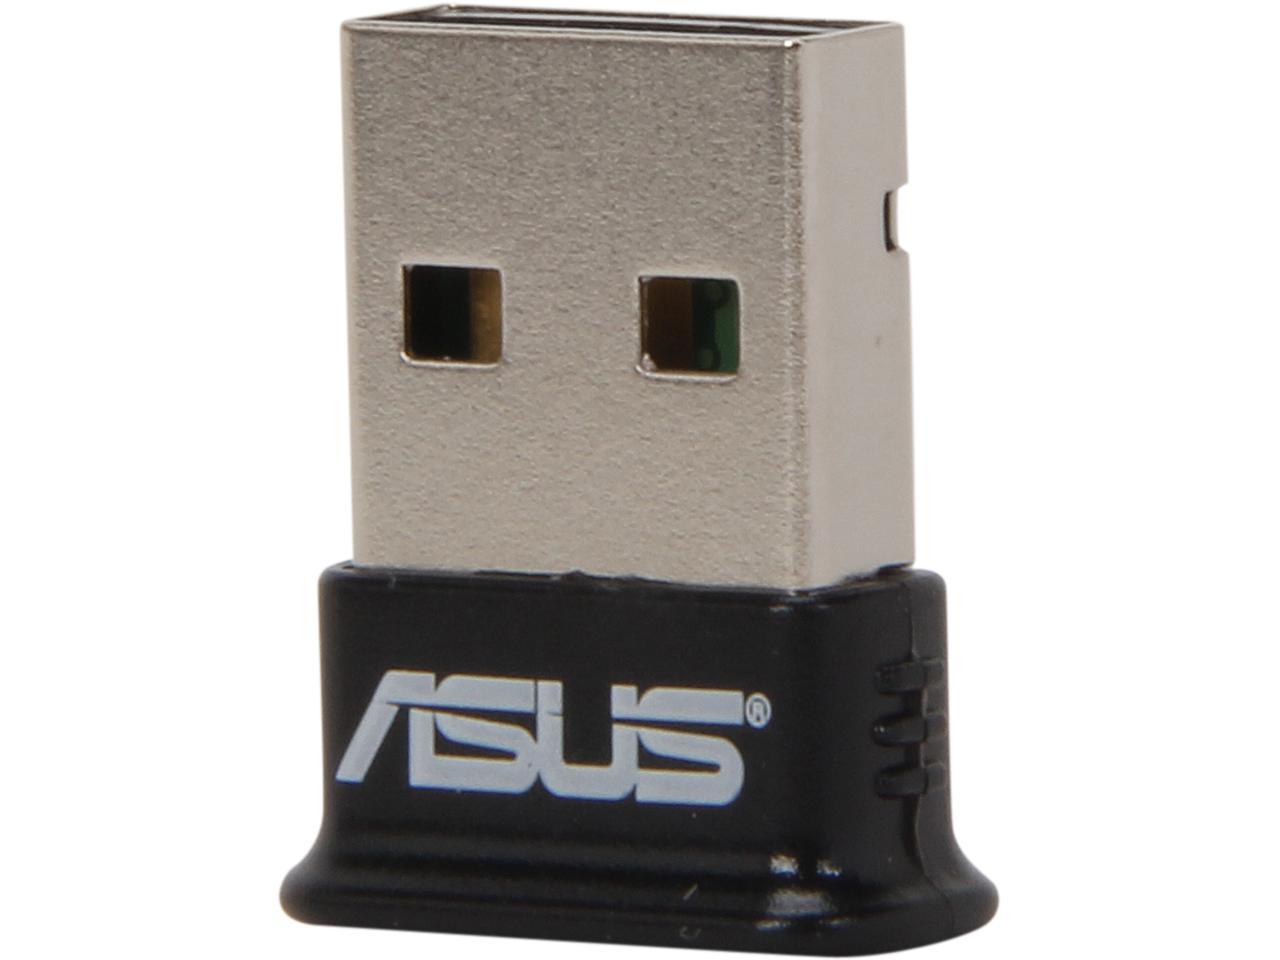 asus usb bt400 pairs but will not connect to windows 10